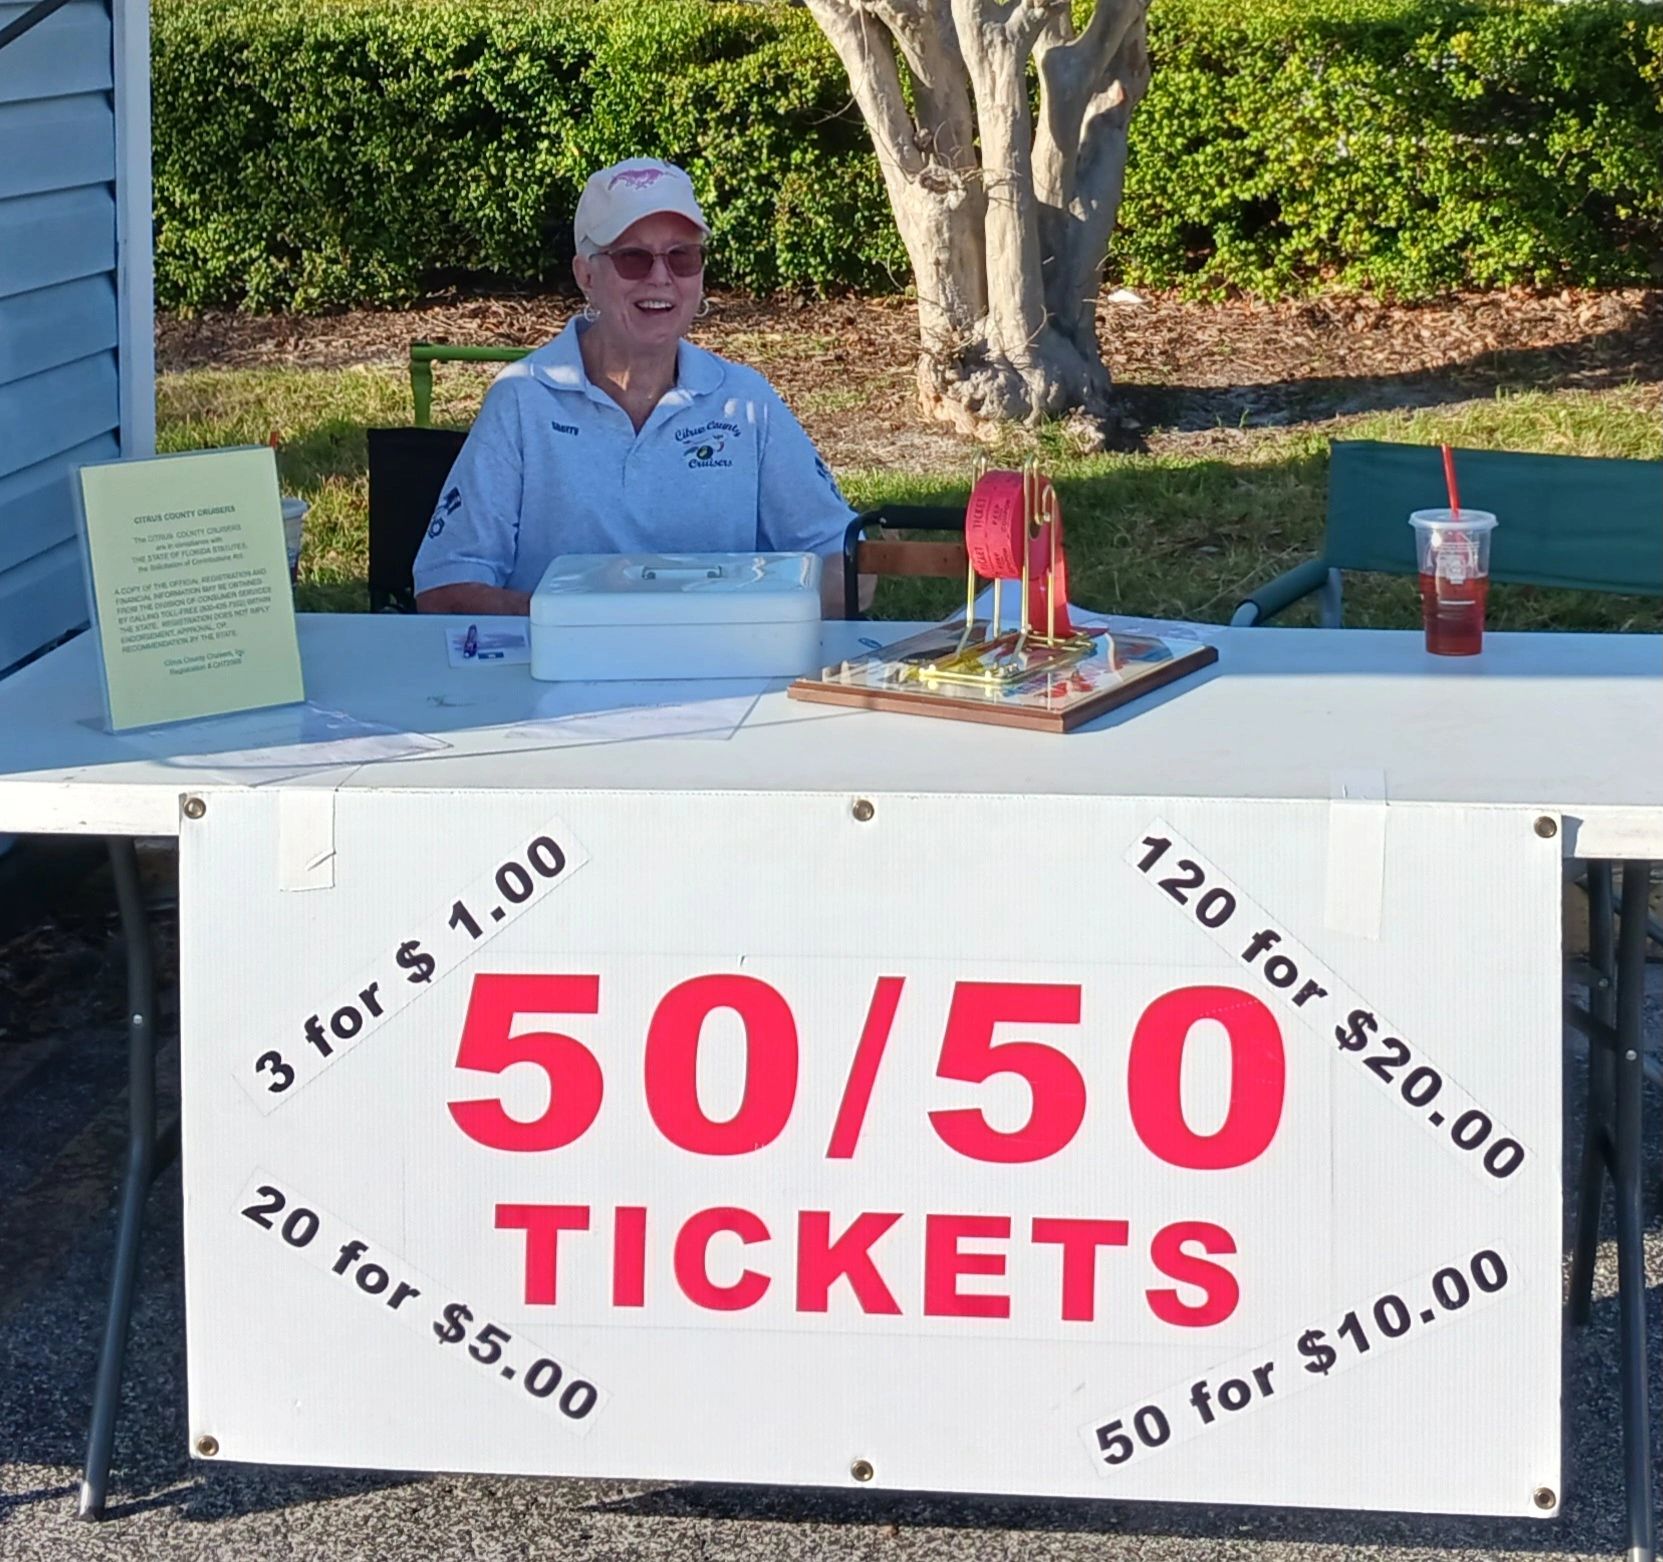 Thank you Sherry for all you do to make the 50/50 raffle a success.